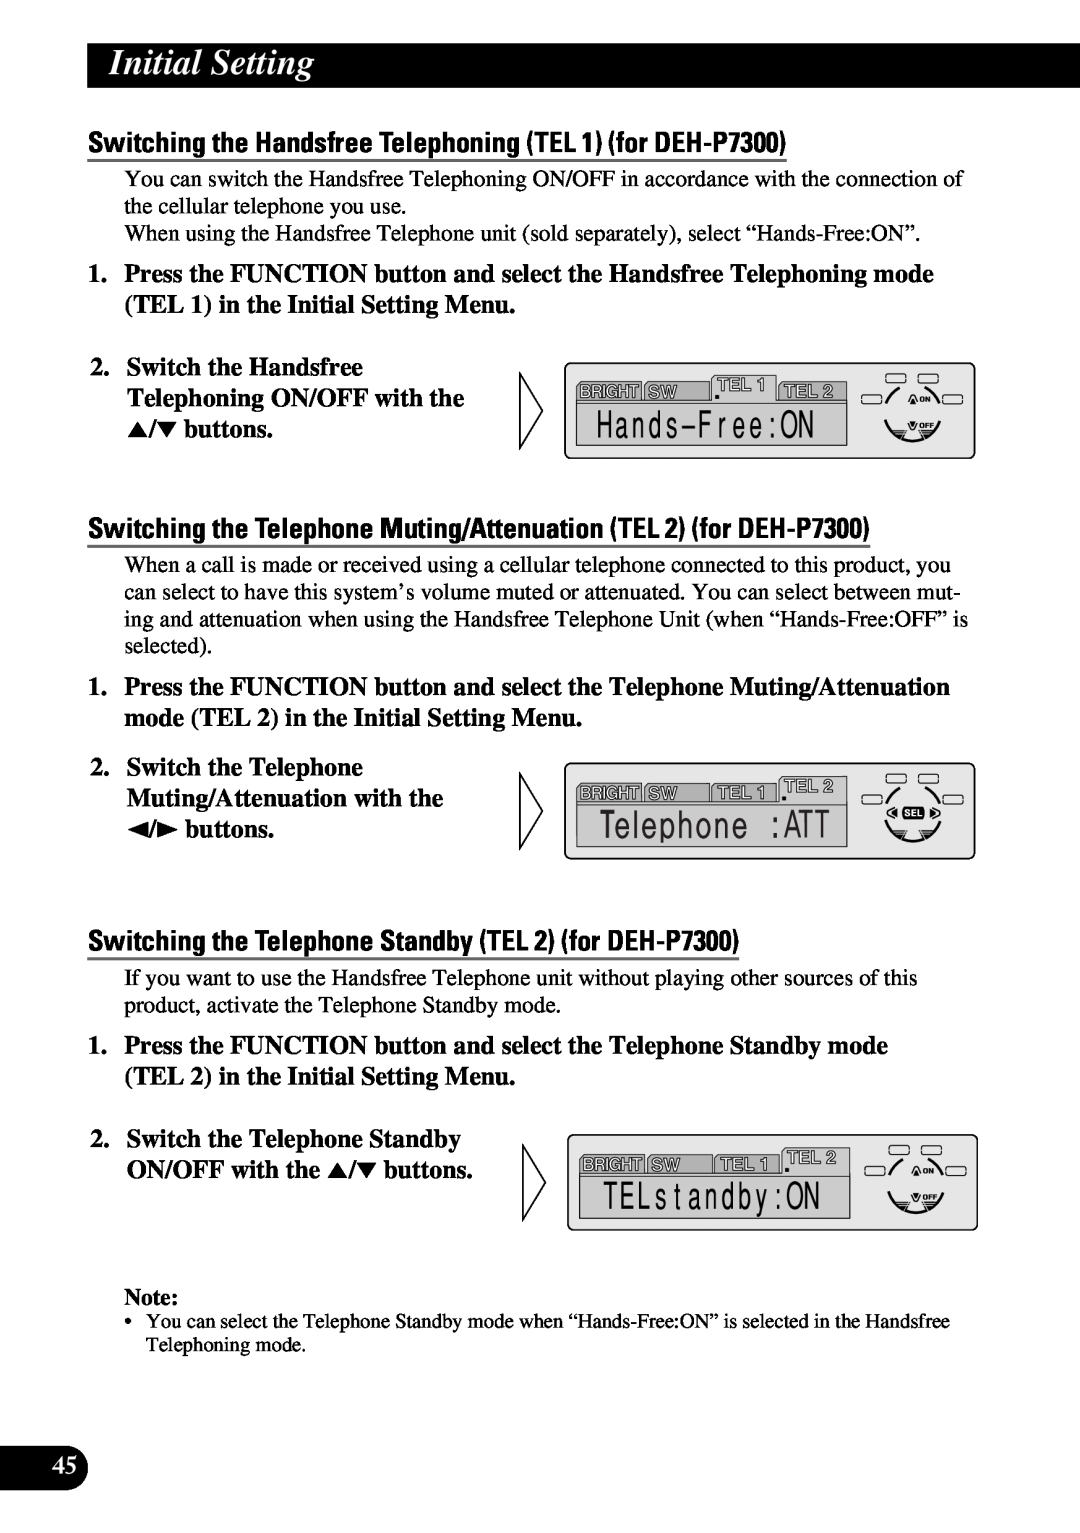 Pioneer DEH-P6300, DEH-P7300 operation manual Switching the Handsfree Telephoning TEL 1 for DEH-P7300, Initial Setting 